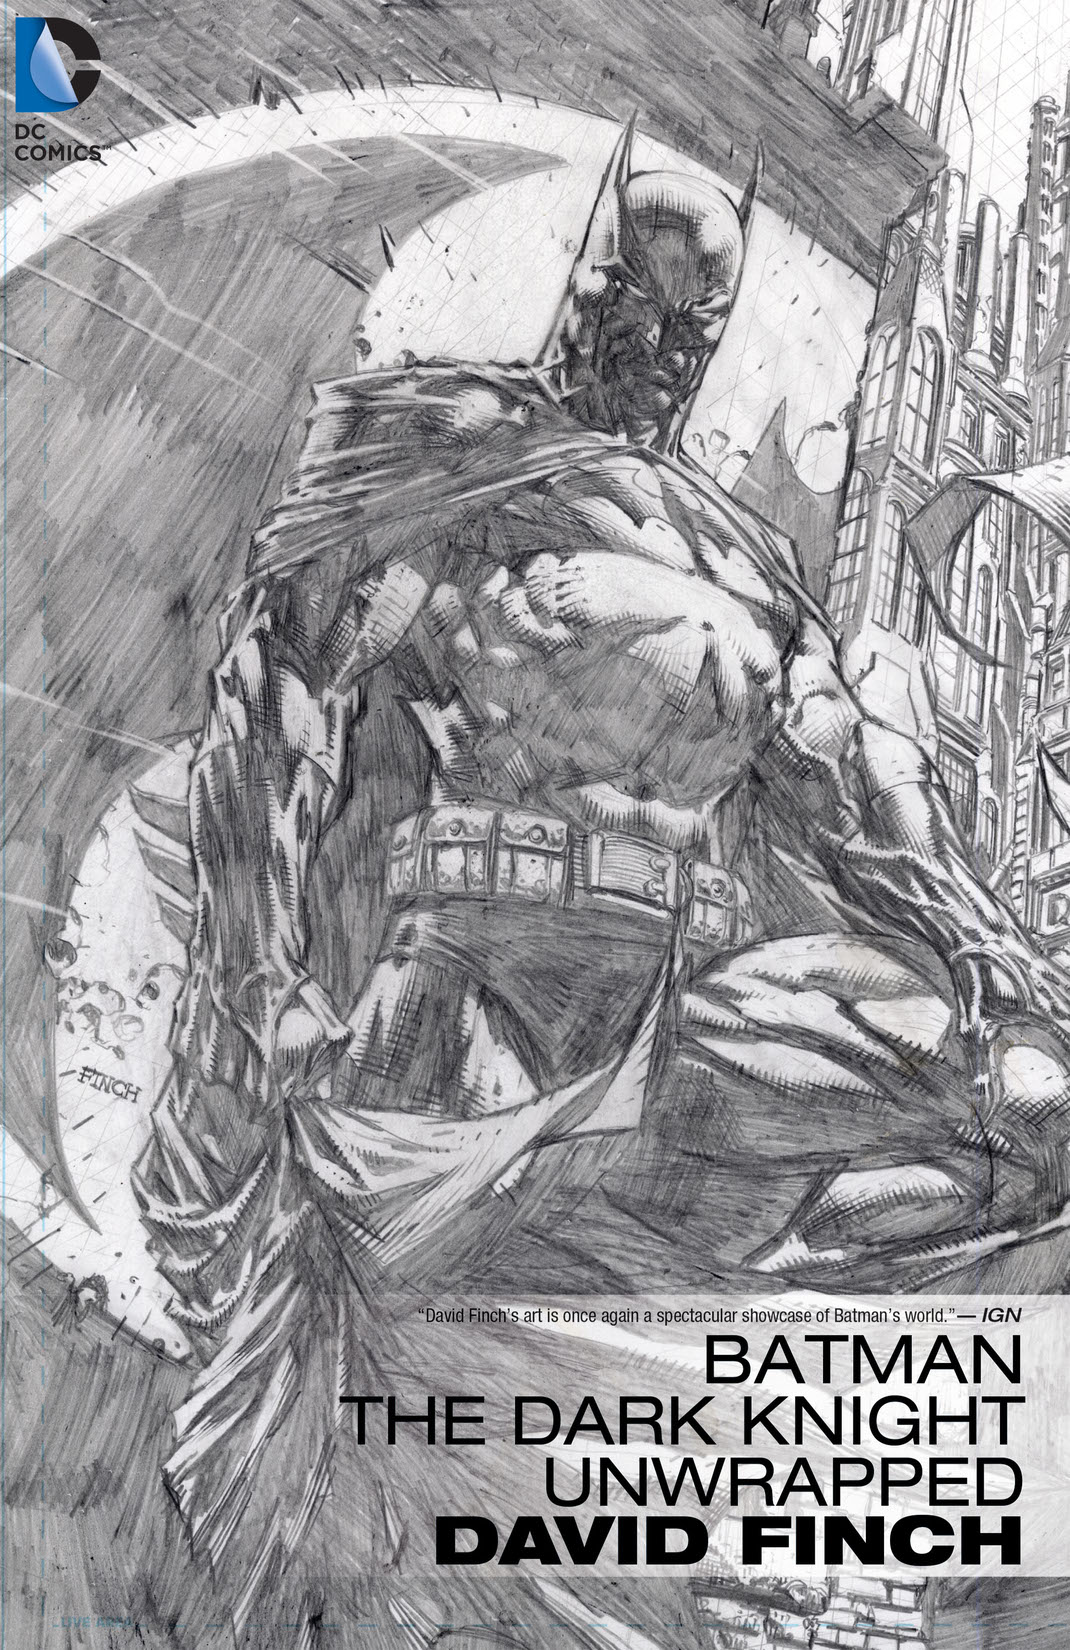 Batman: The Dark Knight Unwrapped by David Finch preview images